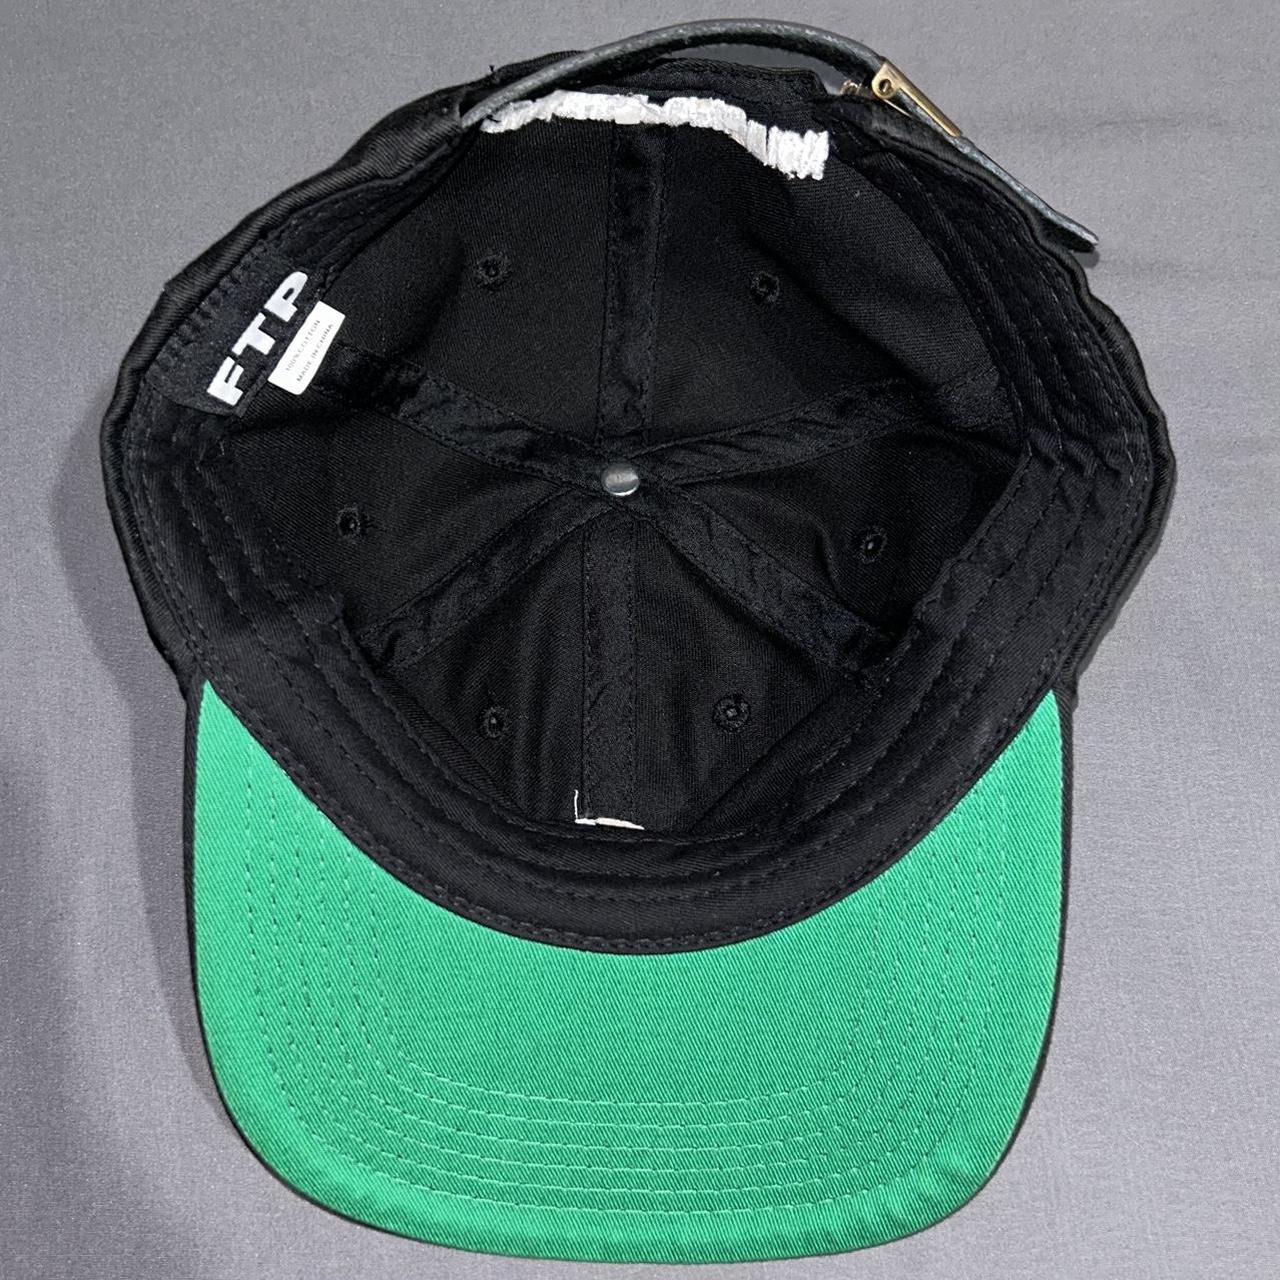 FTP Men's Black and White Hat (4)